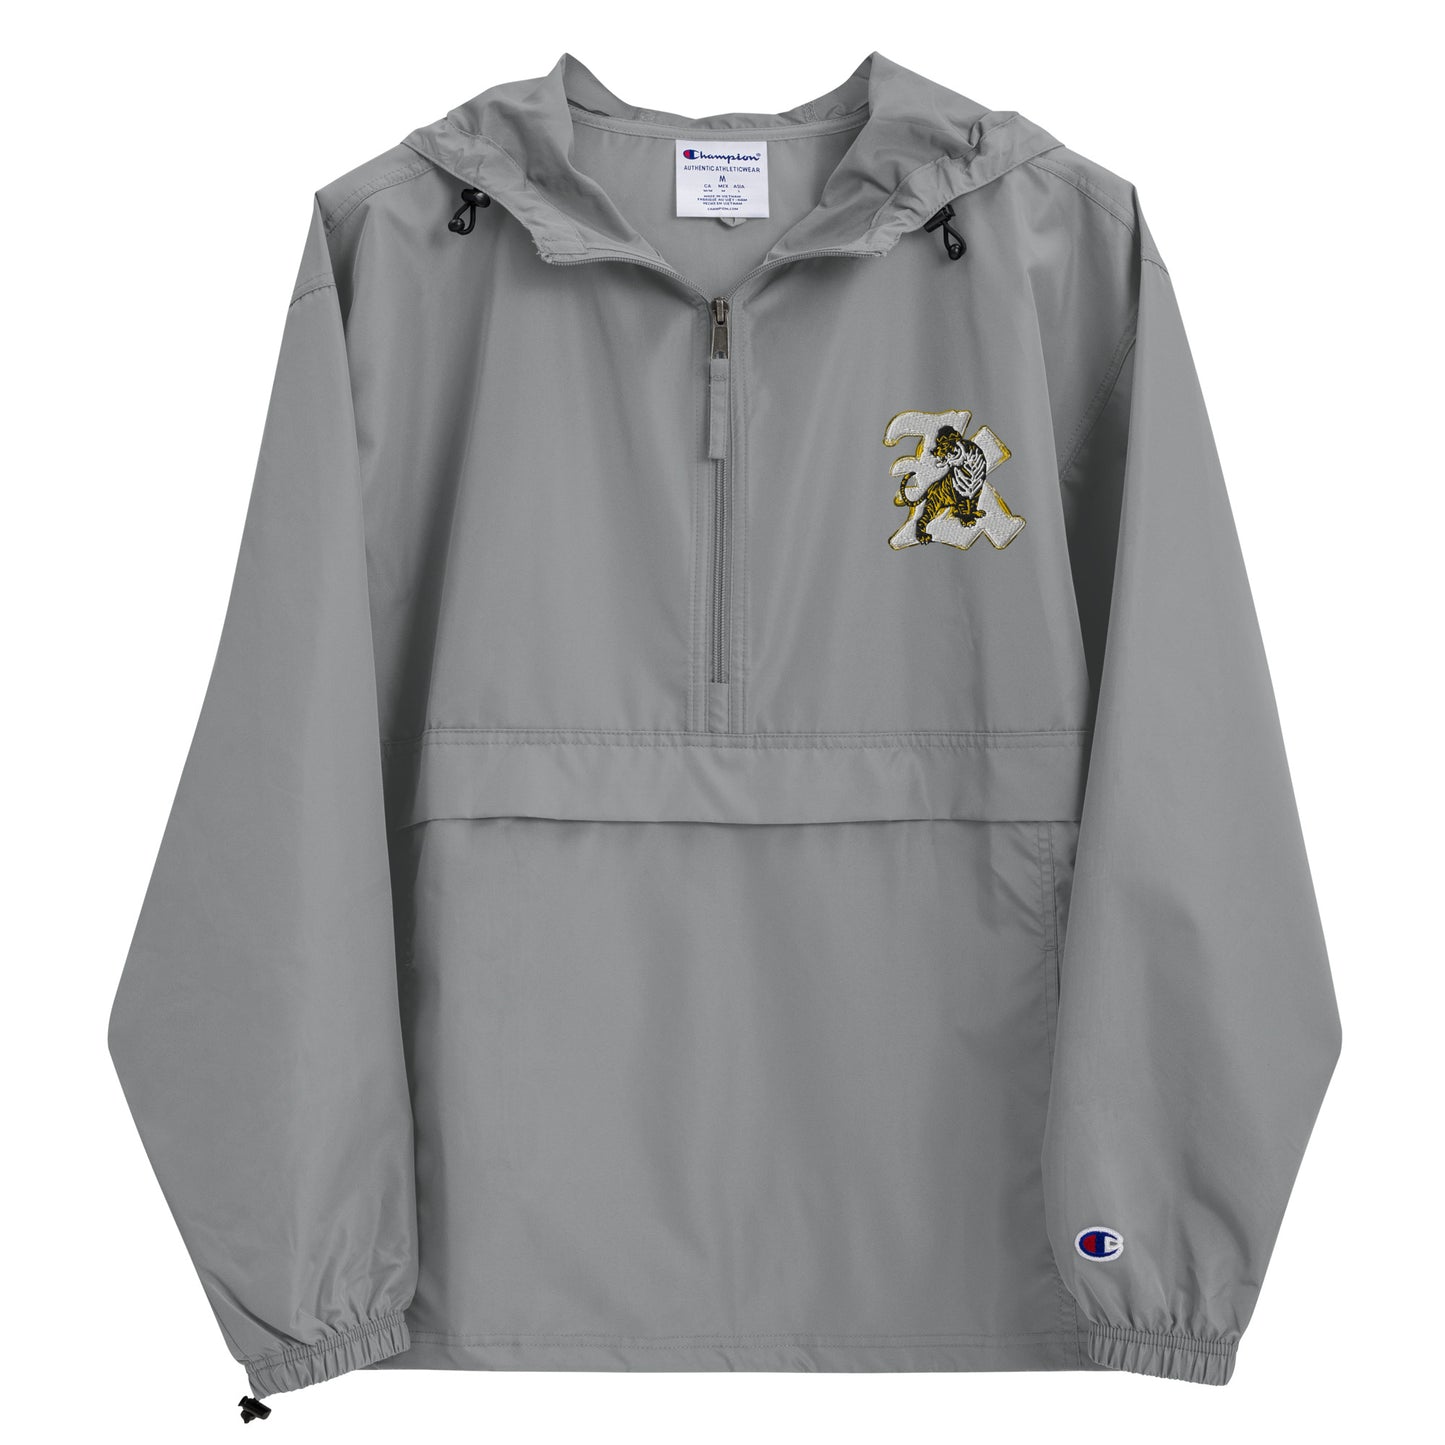 Kamio "Tiger Champion" Packable Jacket